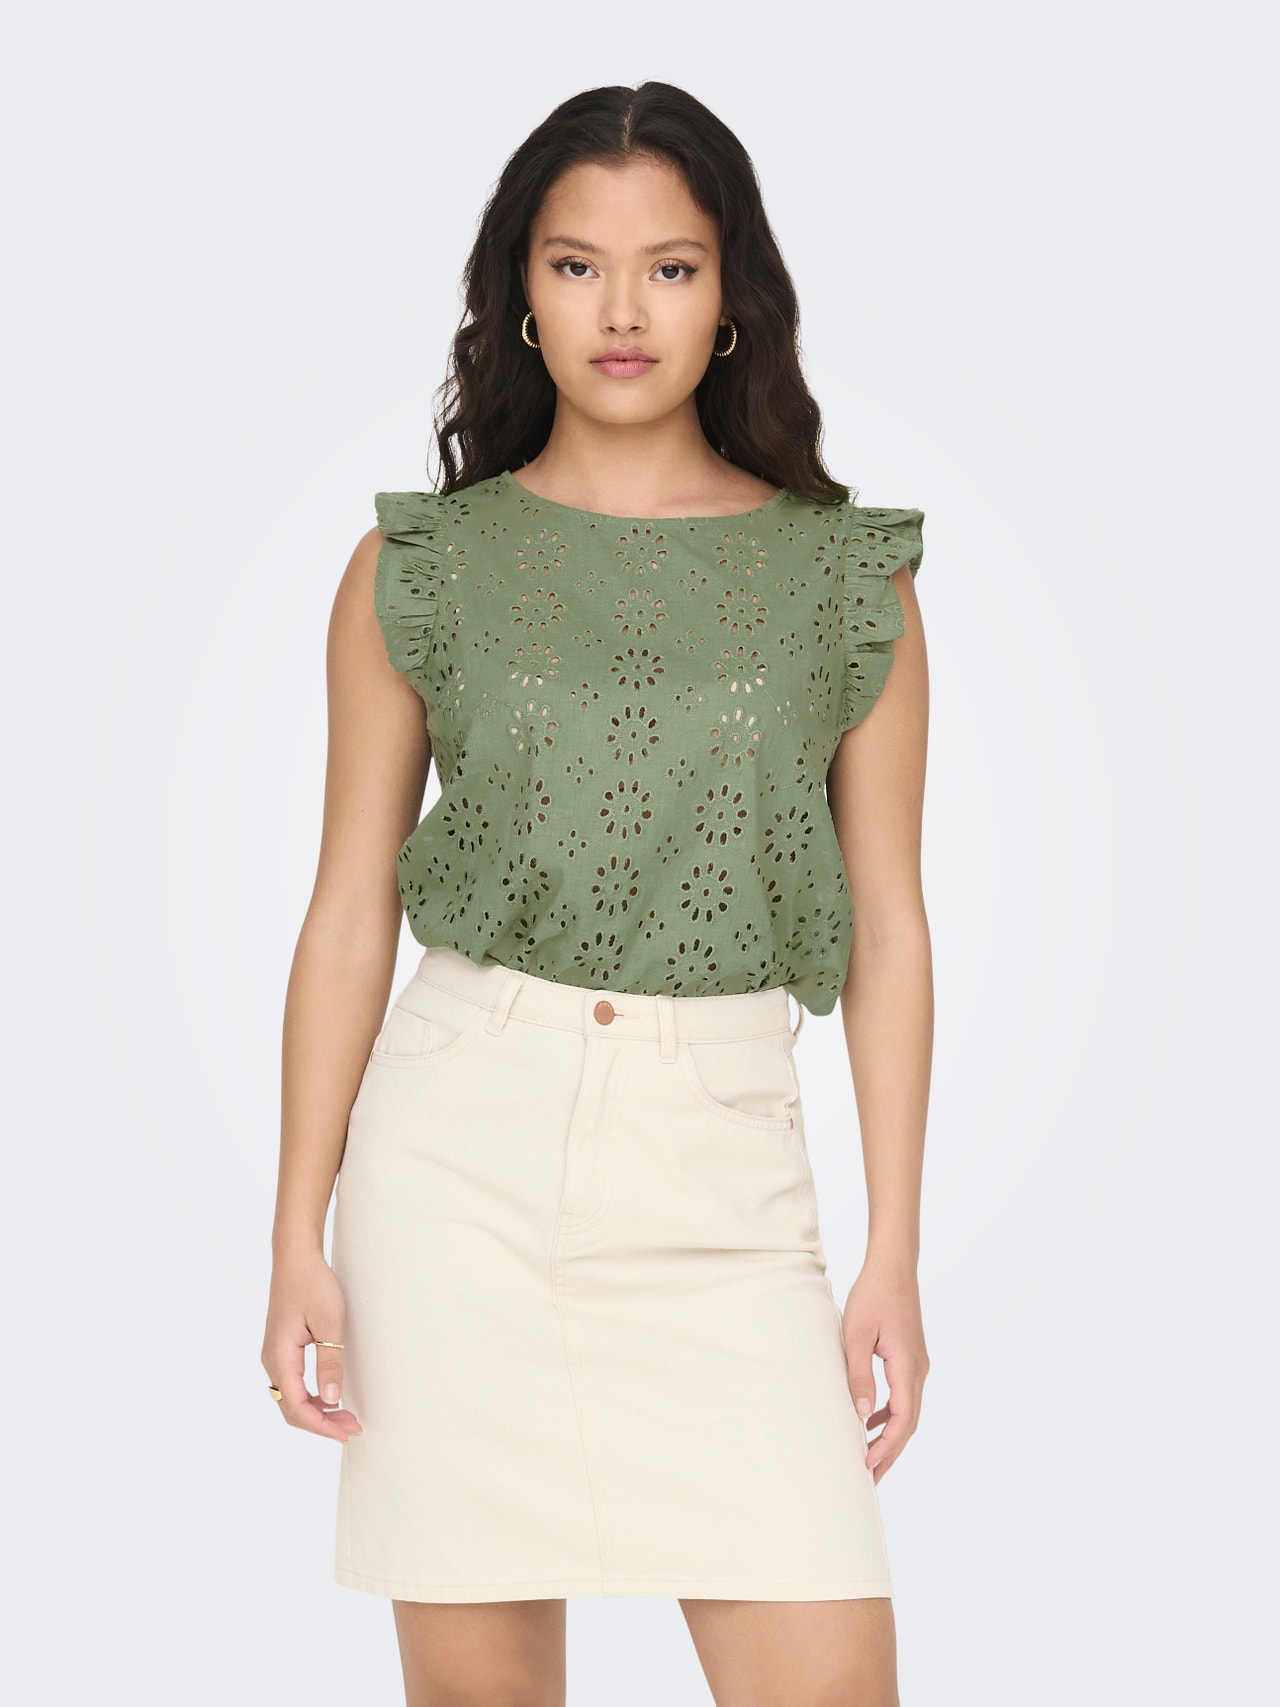 ONLY Regular Fit Round Neck Volume sleeves Top -Oil Green - 15312383